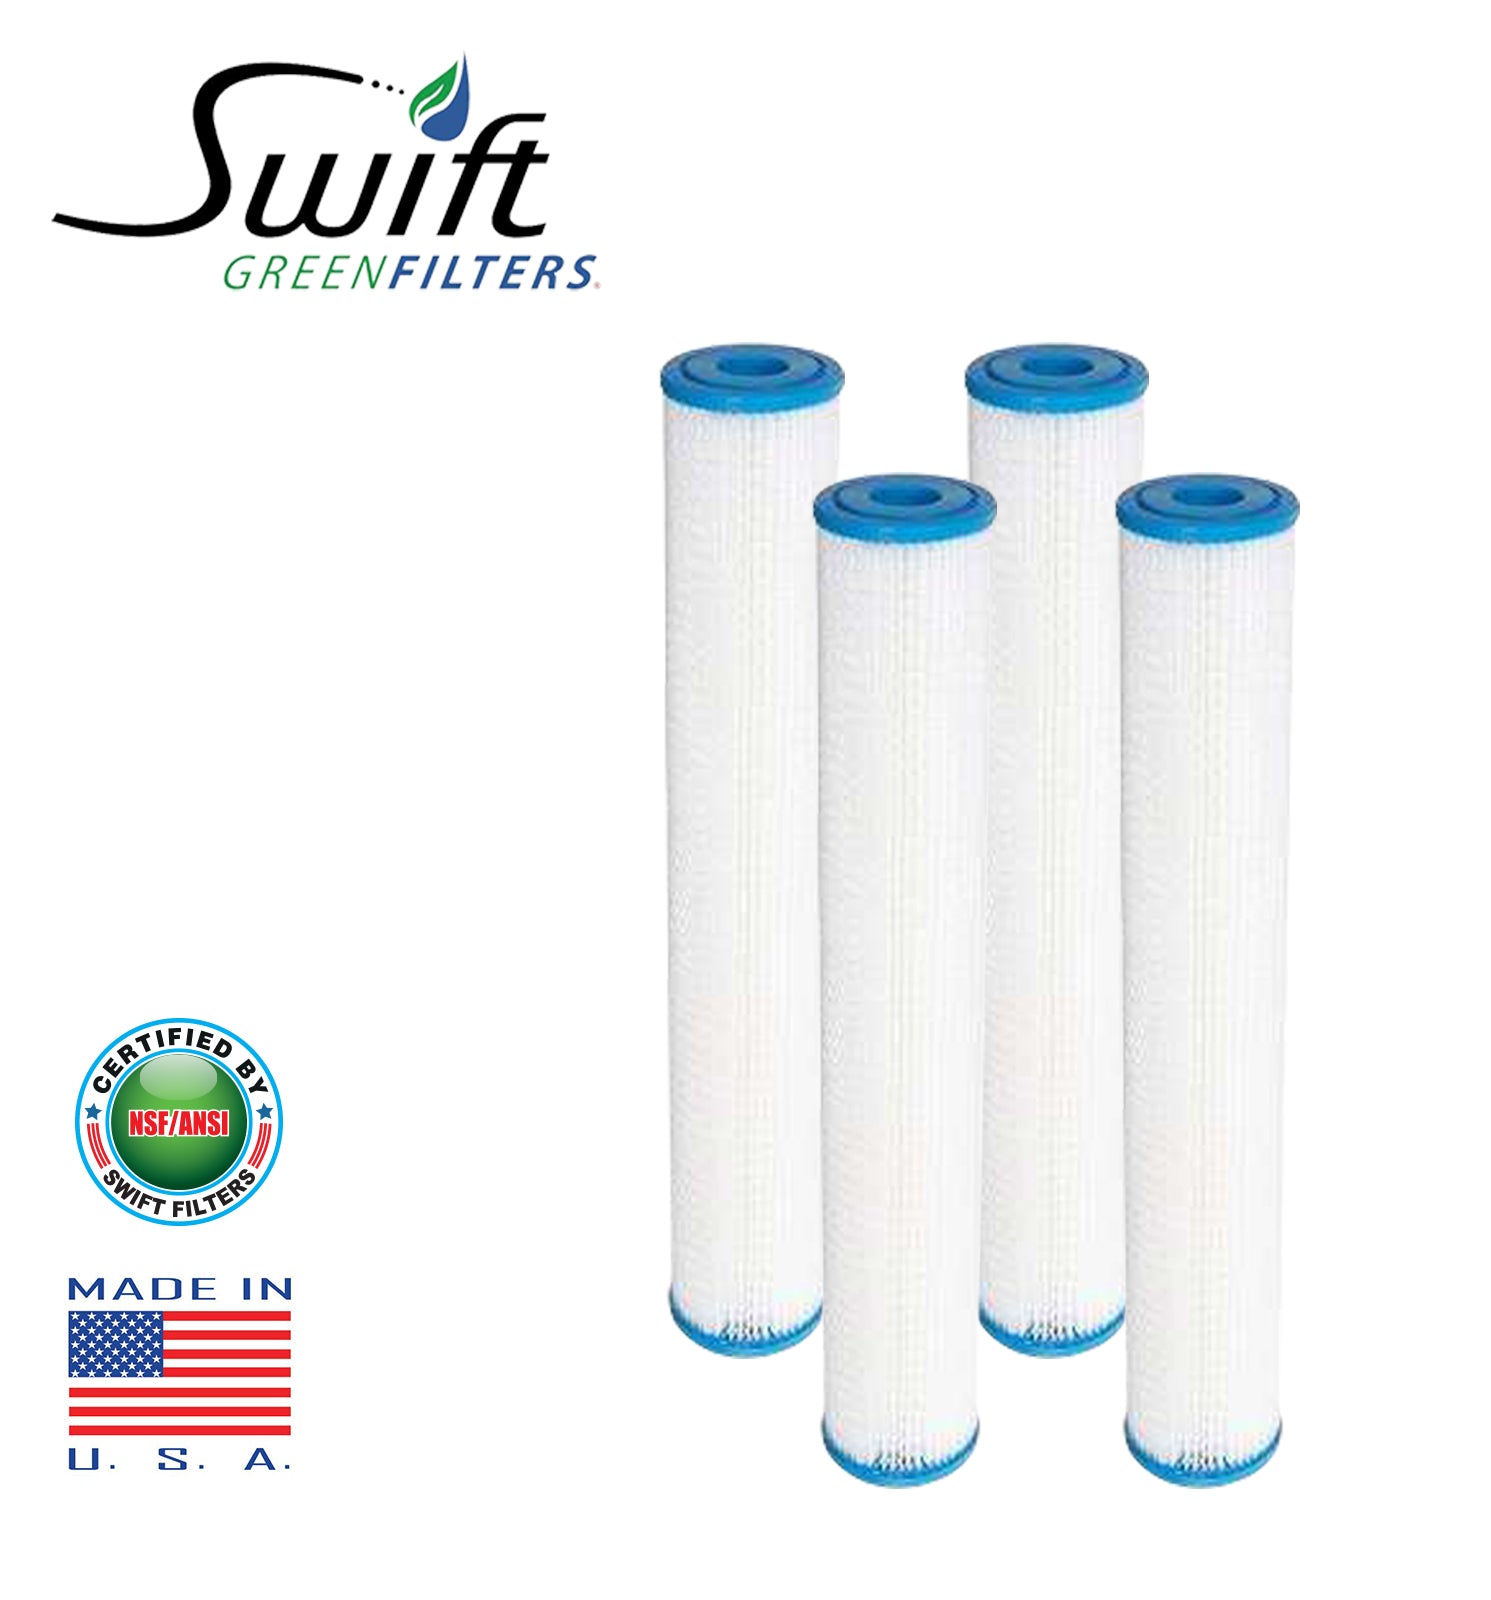 1 Micron Polyester Pleated Washable Sediment Water Filter 2.5" x 20" by Swift Green Filters